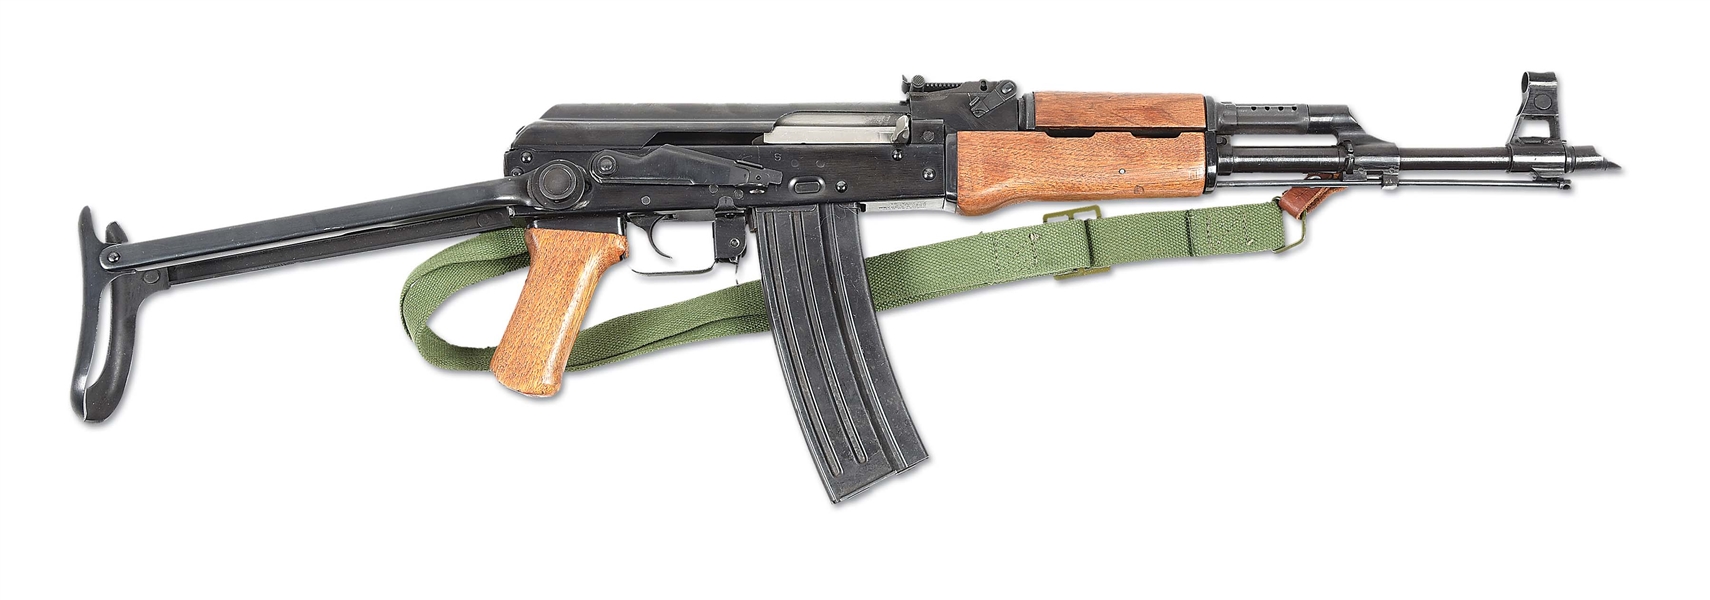 (N) VERY ATTRACTIVE CHINESE UNDER-FOLDING STOCK AKS-223 MACHINE GUN (FULLY TRANSFERABLE).